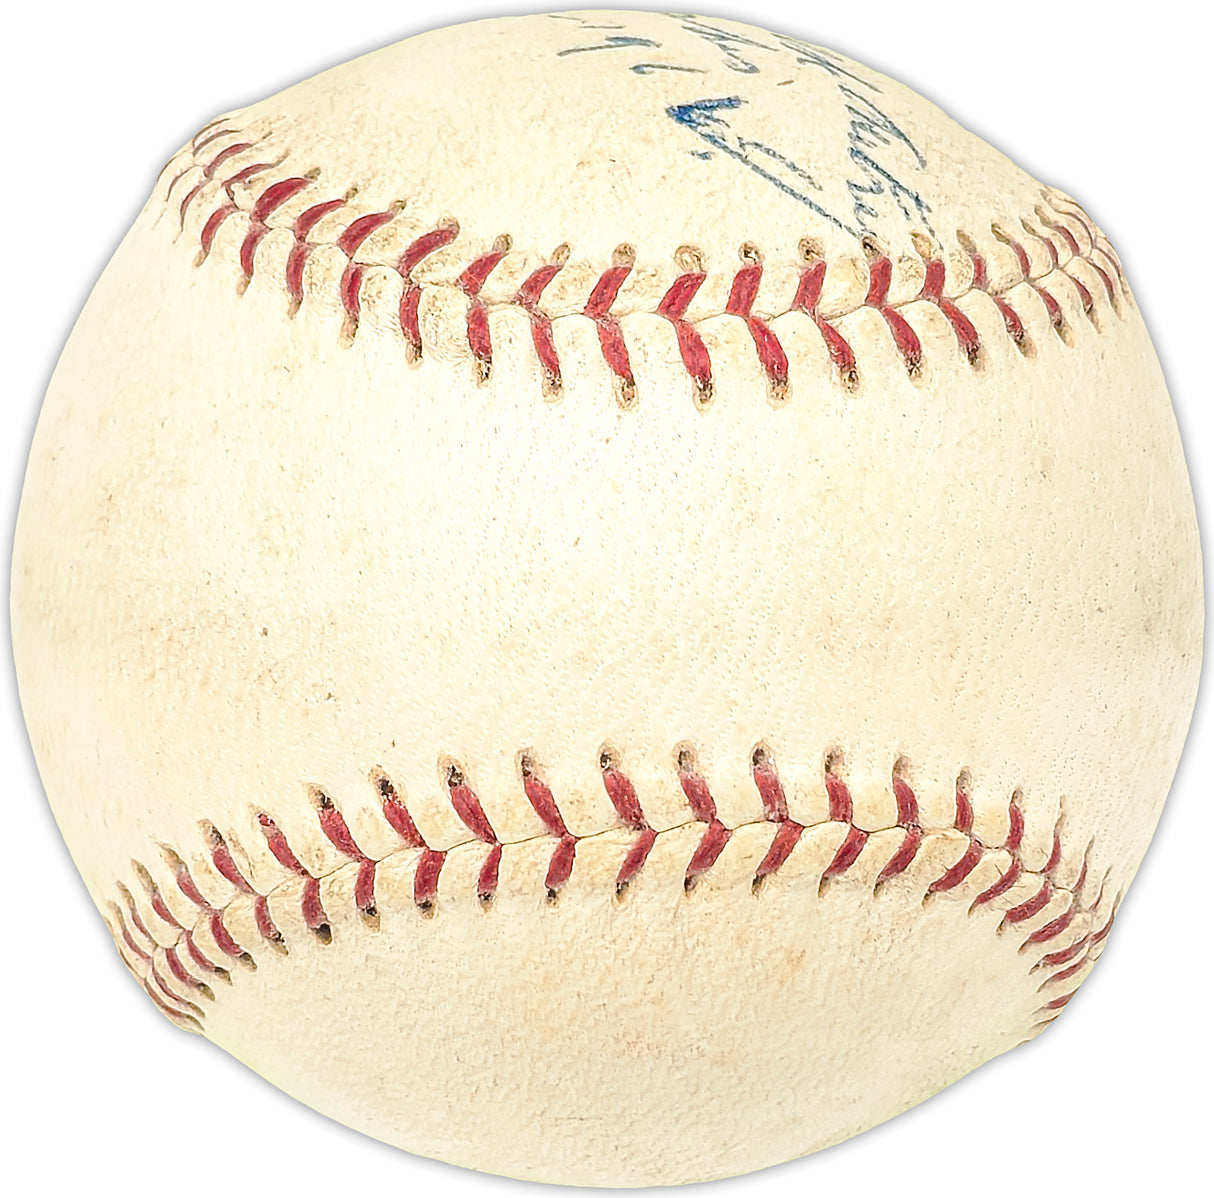 W.A. "Chick" Autry Autographed Official Giles NL Baseball Cincinnati Reds "To My Friend Mike Best Wishes Mar. 30, 1961" Died 1976 PSA/DNA #G25322